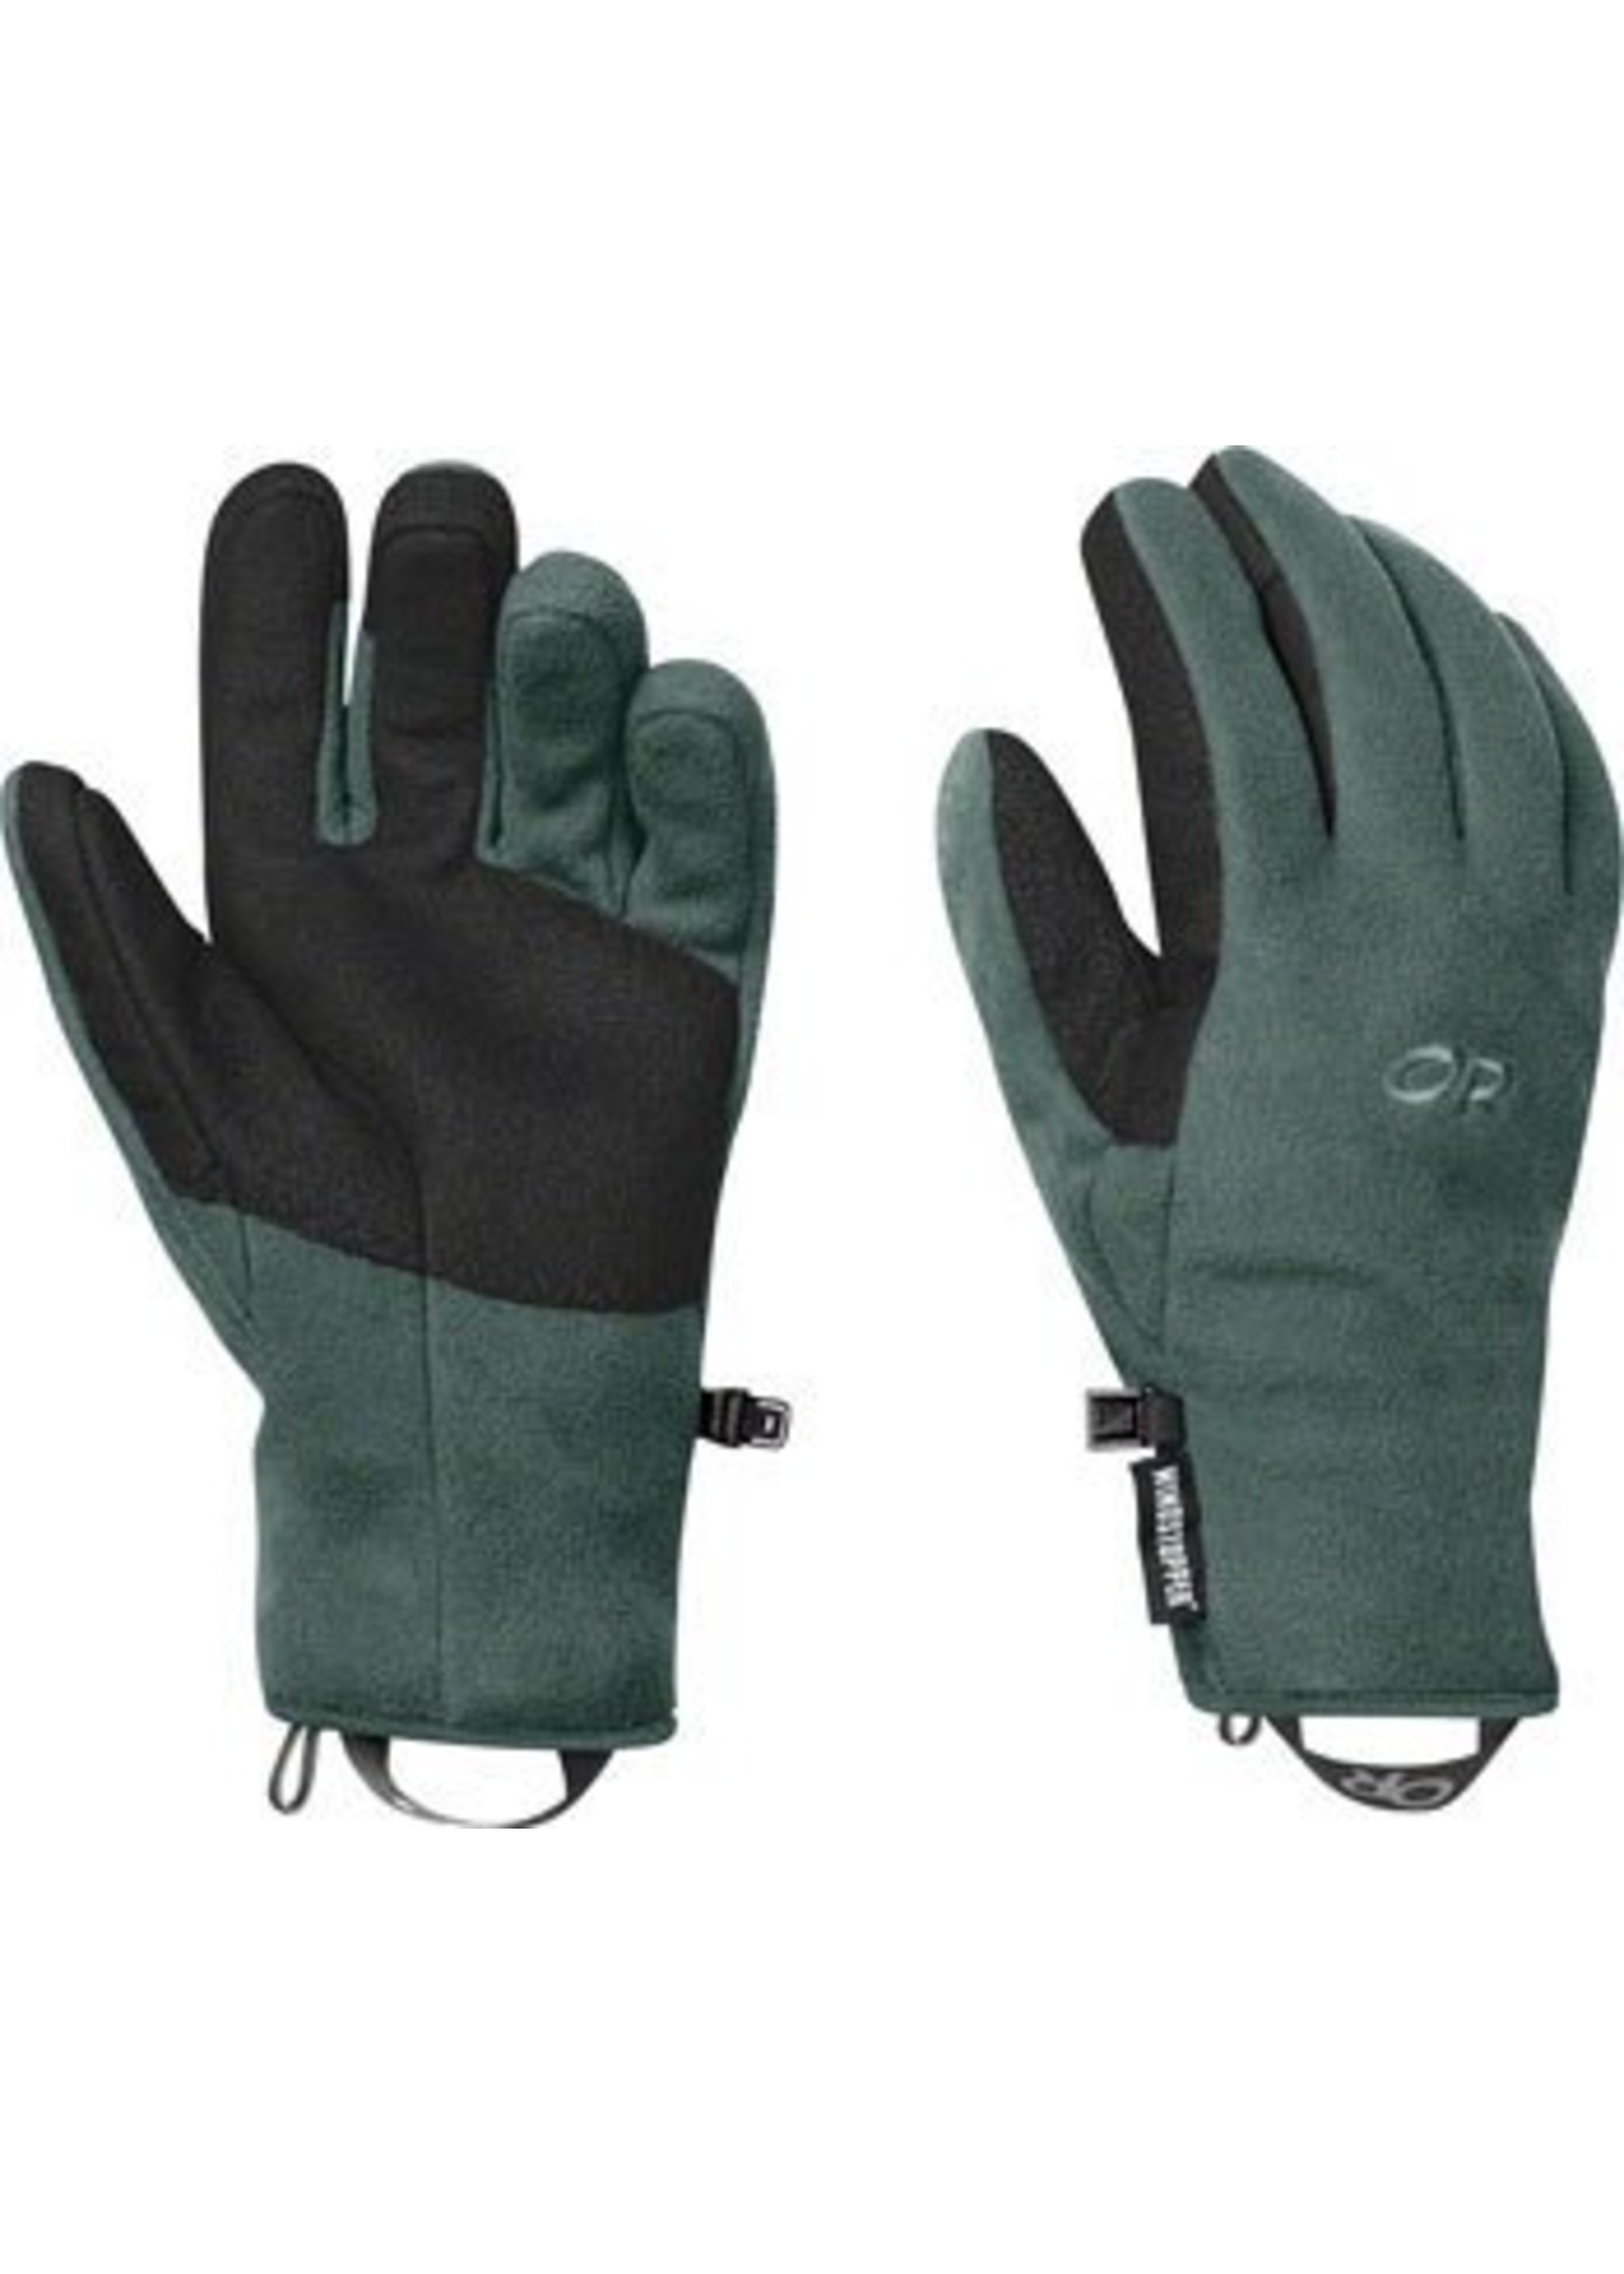 Outdoor Research Gripper Gloves: Foliage, MD